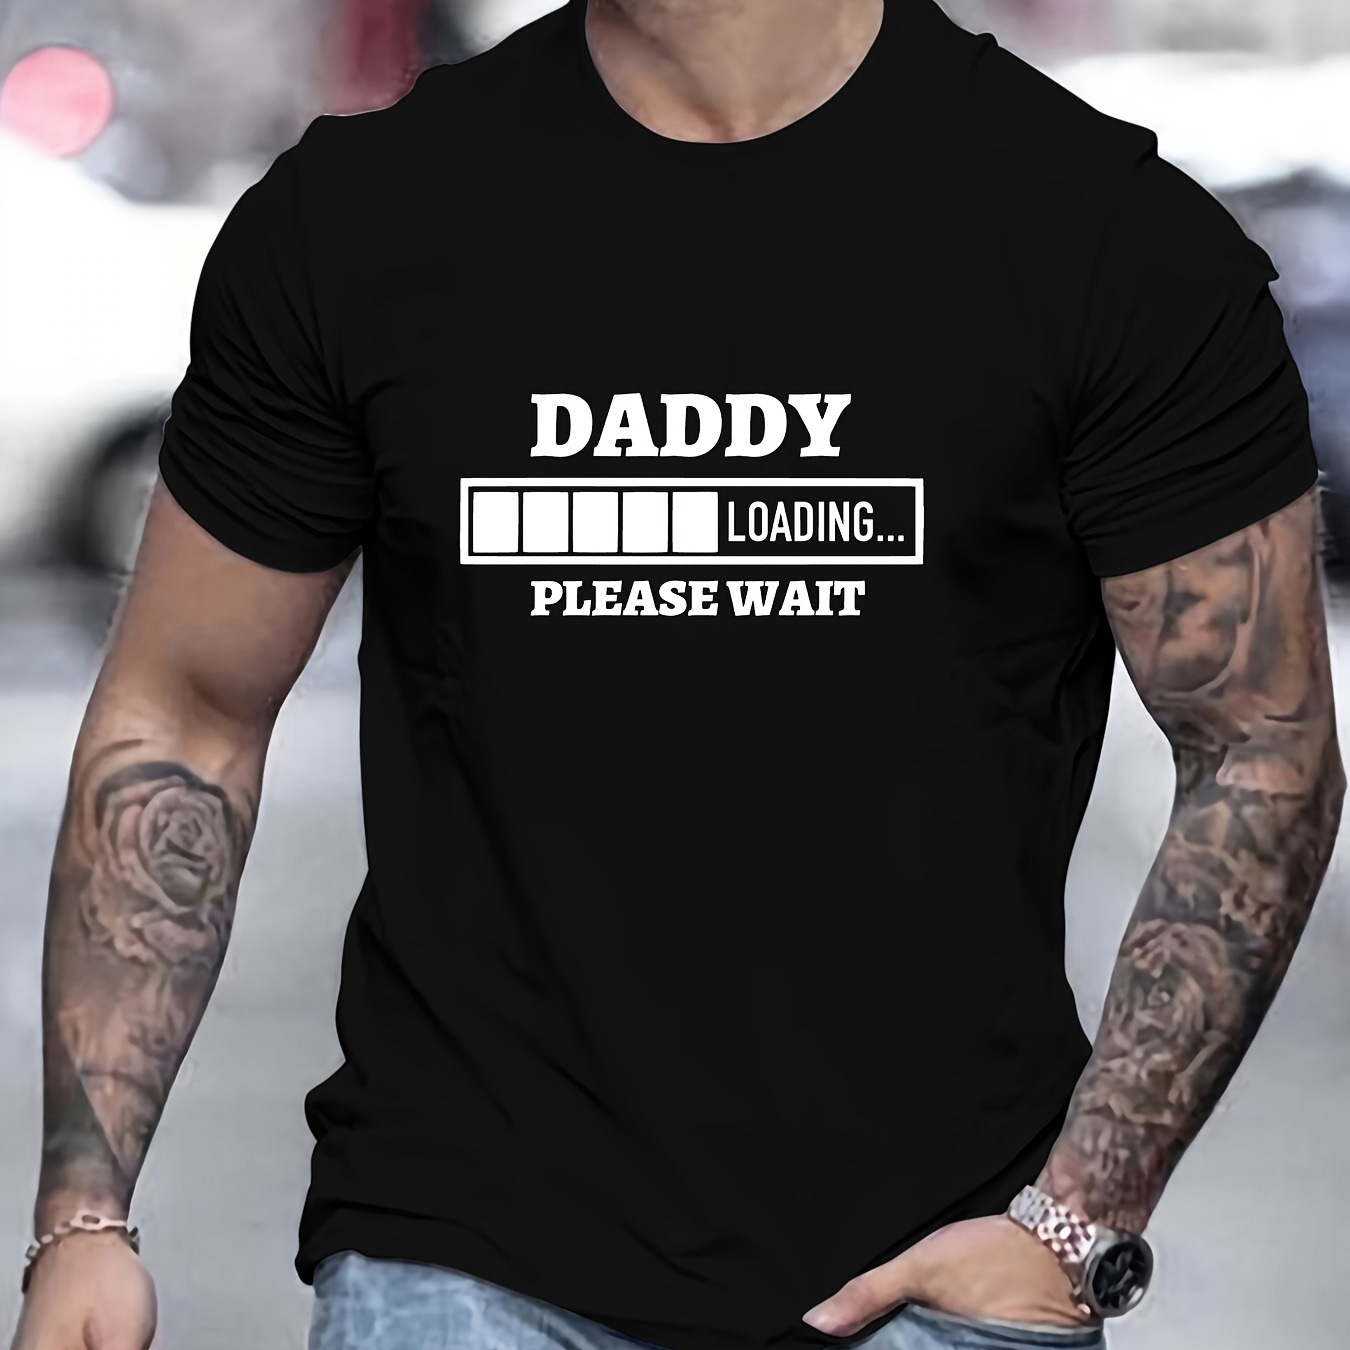 

Daddy Loading Print T Shirt, Tees For Men, Casual Short Sleeve T-shirt For Summer